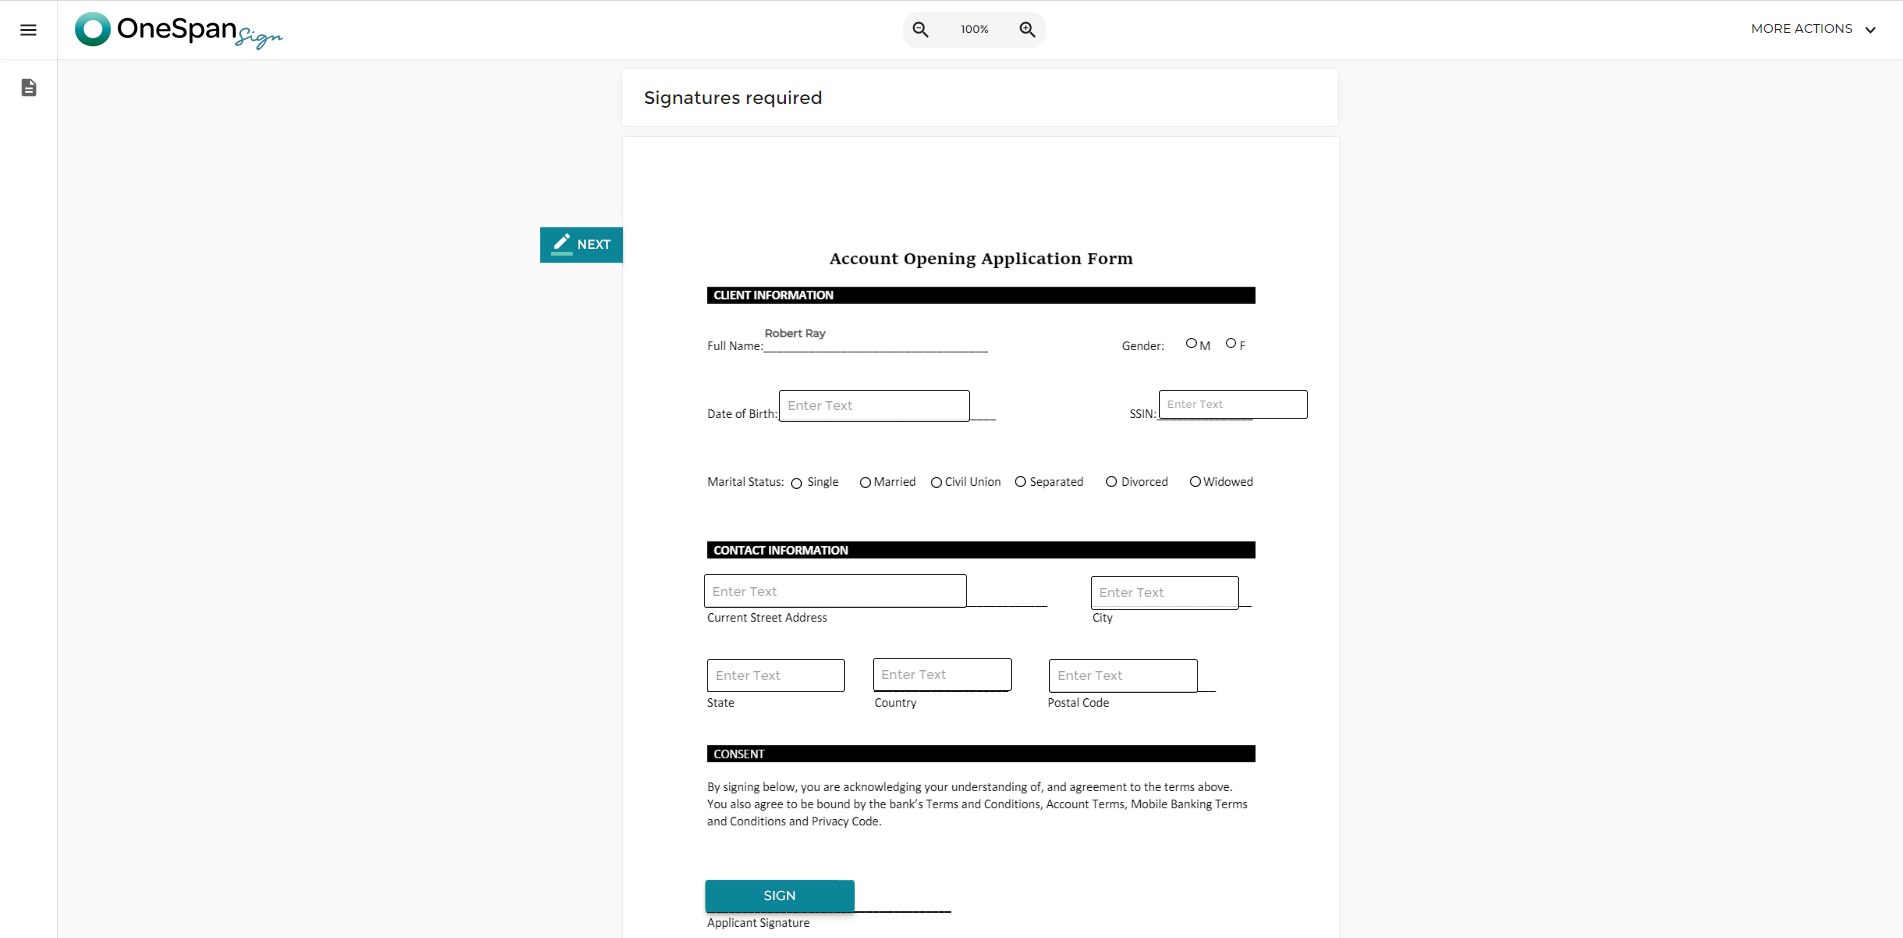 The signer can click-to-sign to complete the signing of the account opening application.